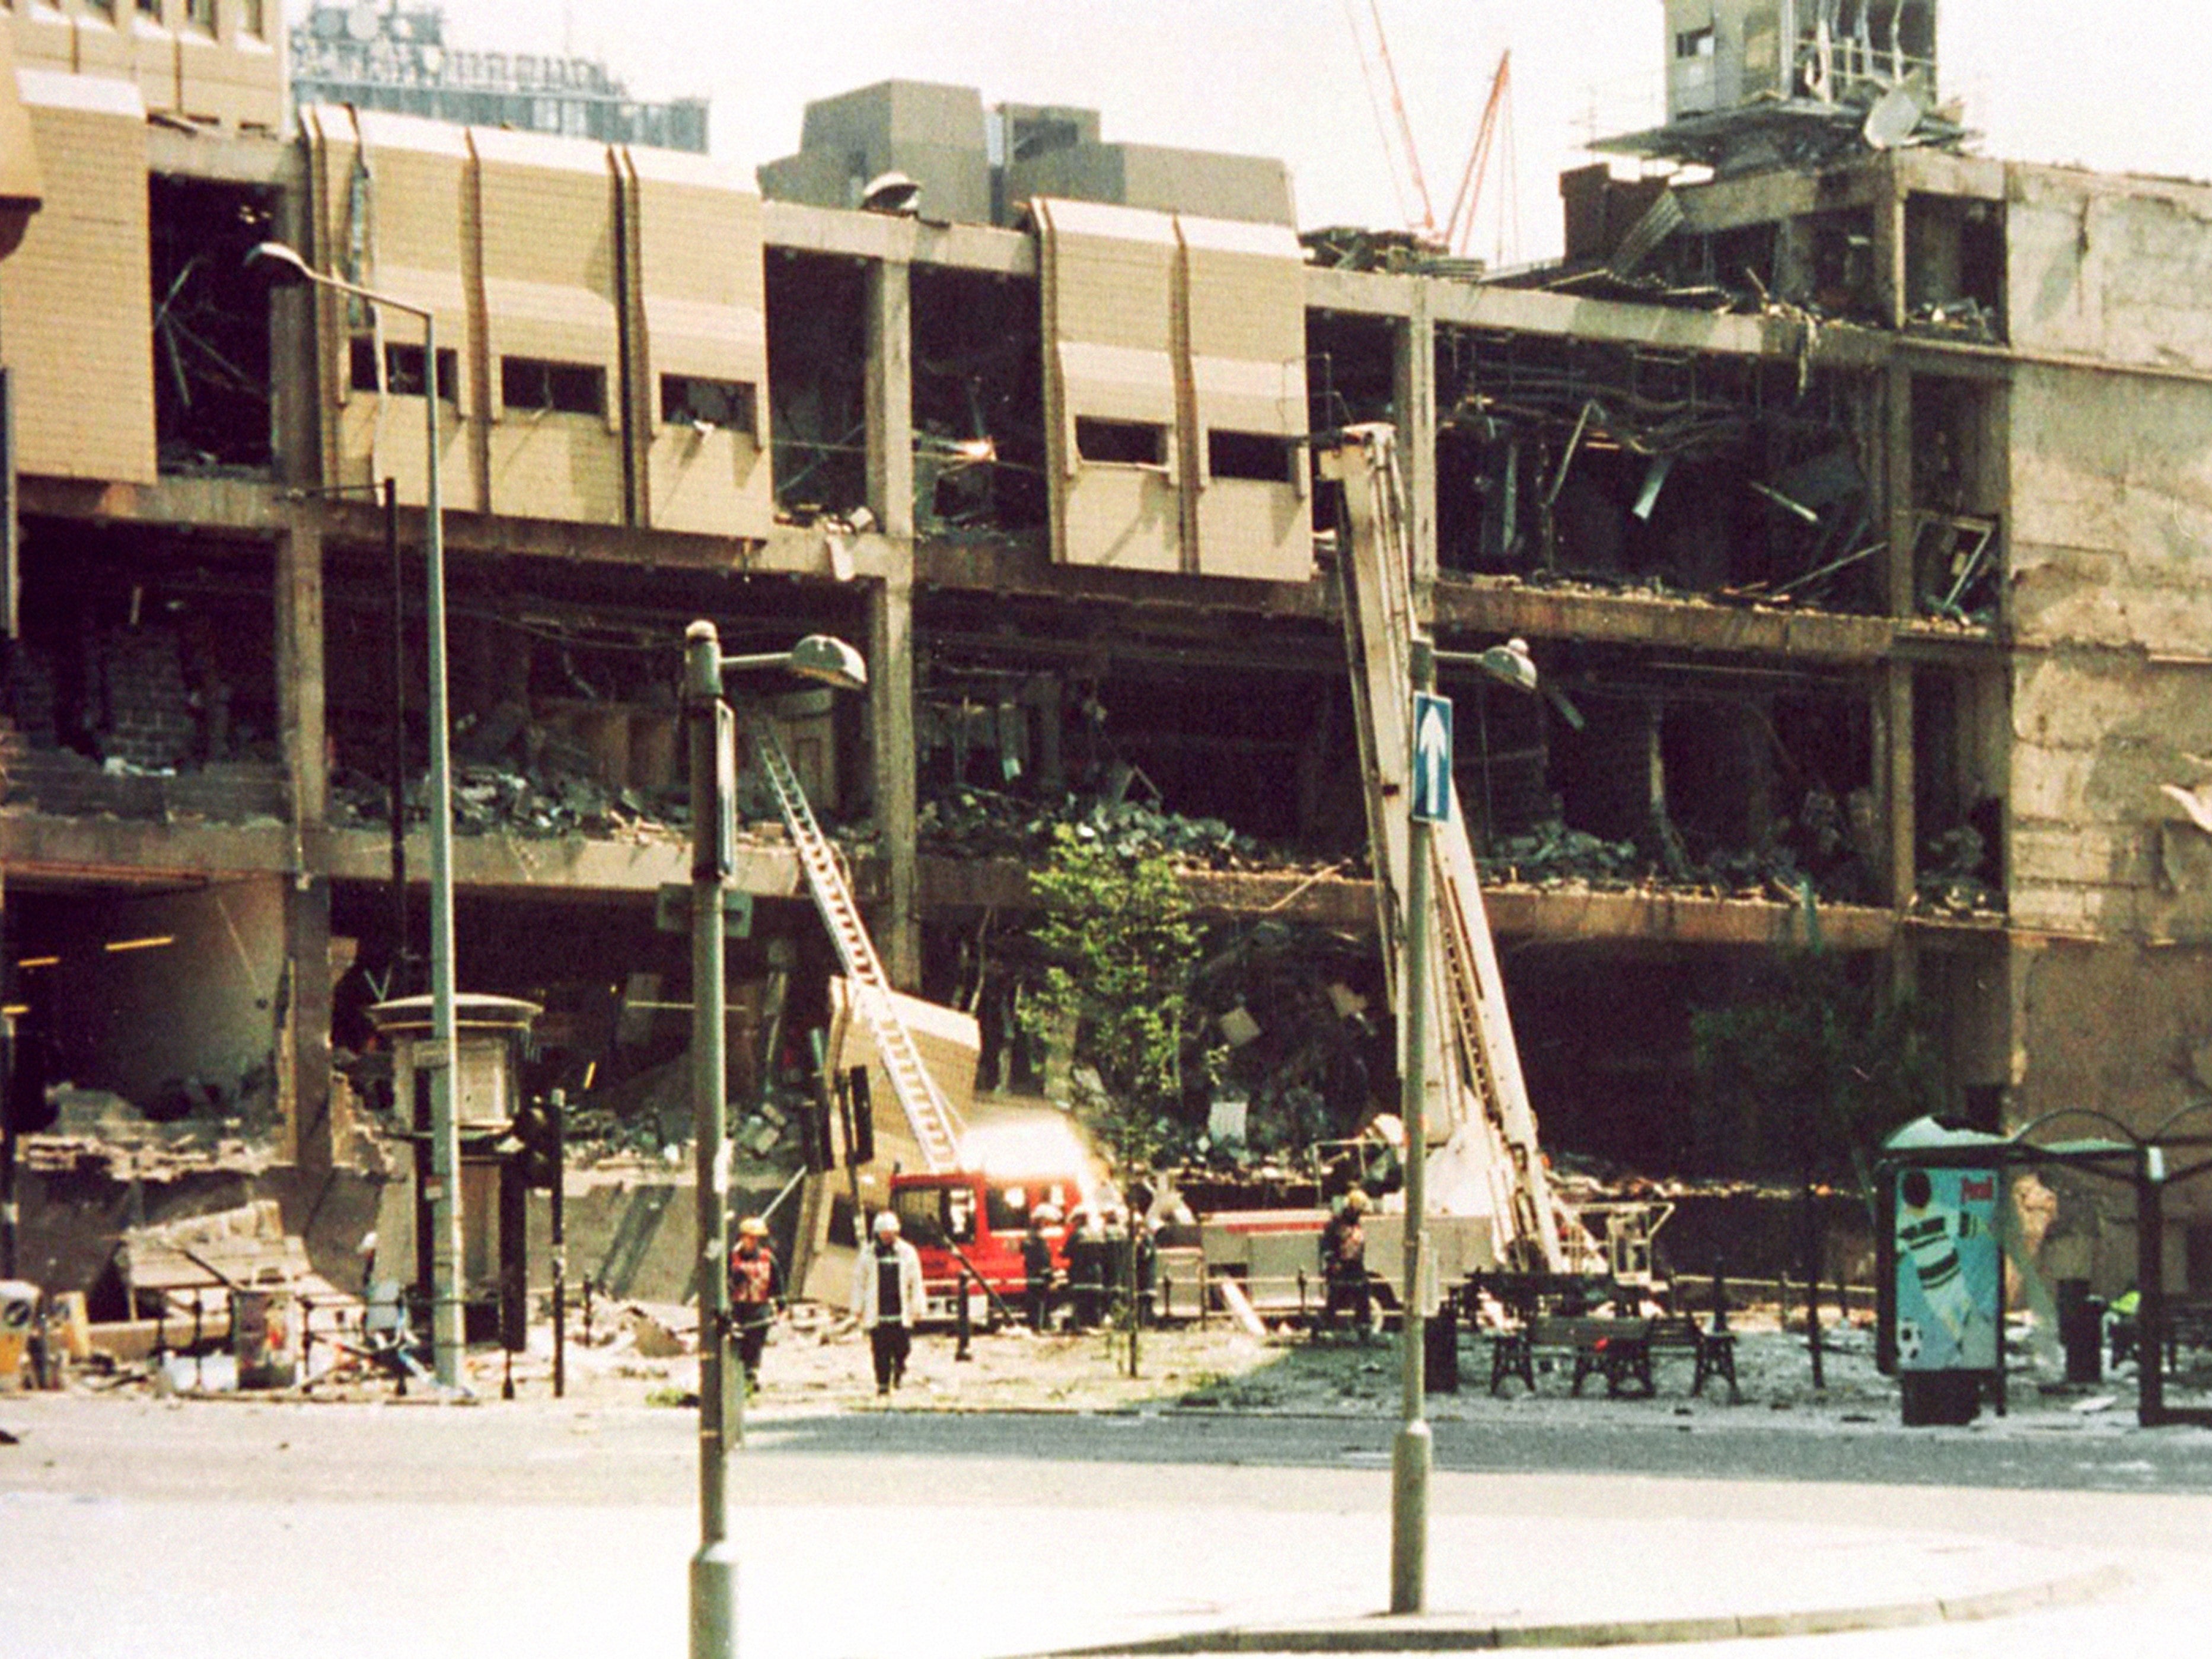 An army bomb disposal robot was working on defusing the device when, at 11.17am on 15 June 1996, time ran out